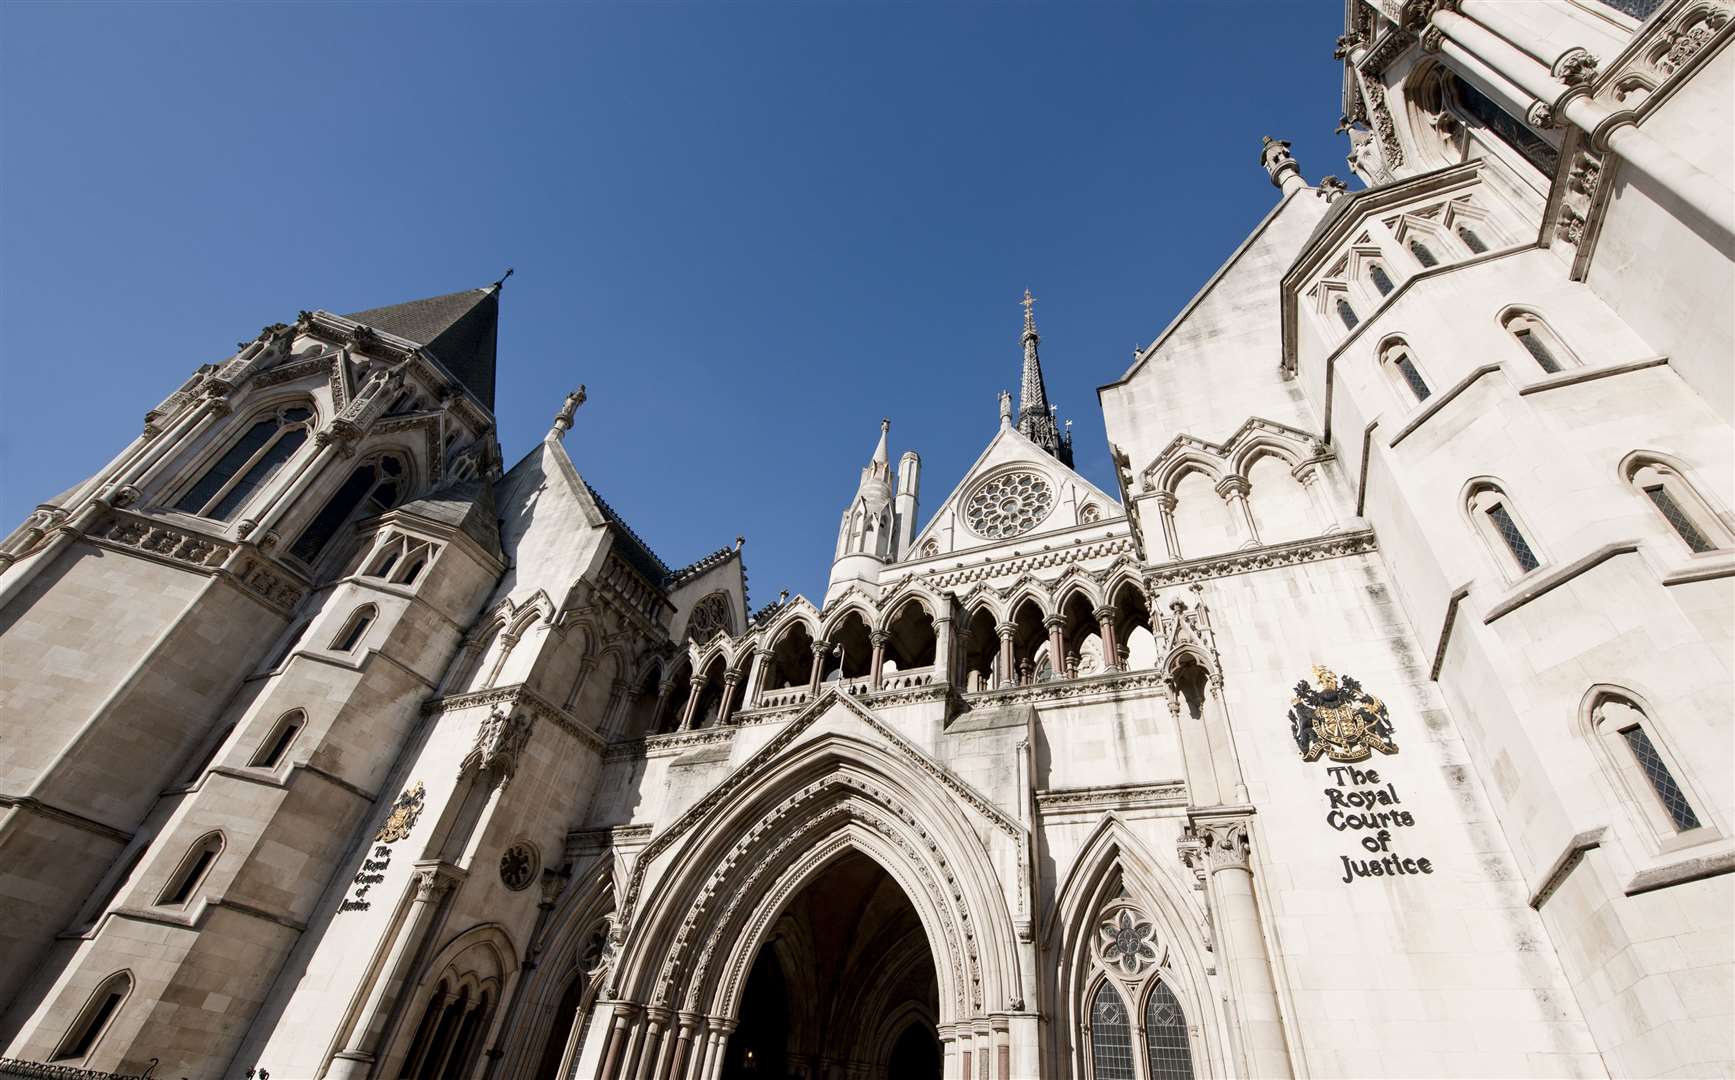 A view of The Royal Courts of Justice Picture: iStockphoto